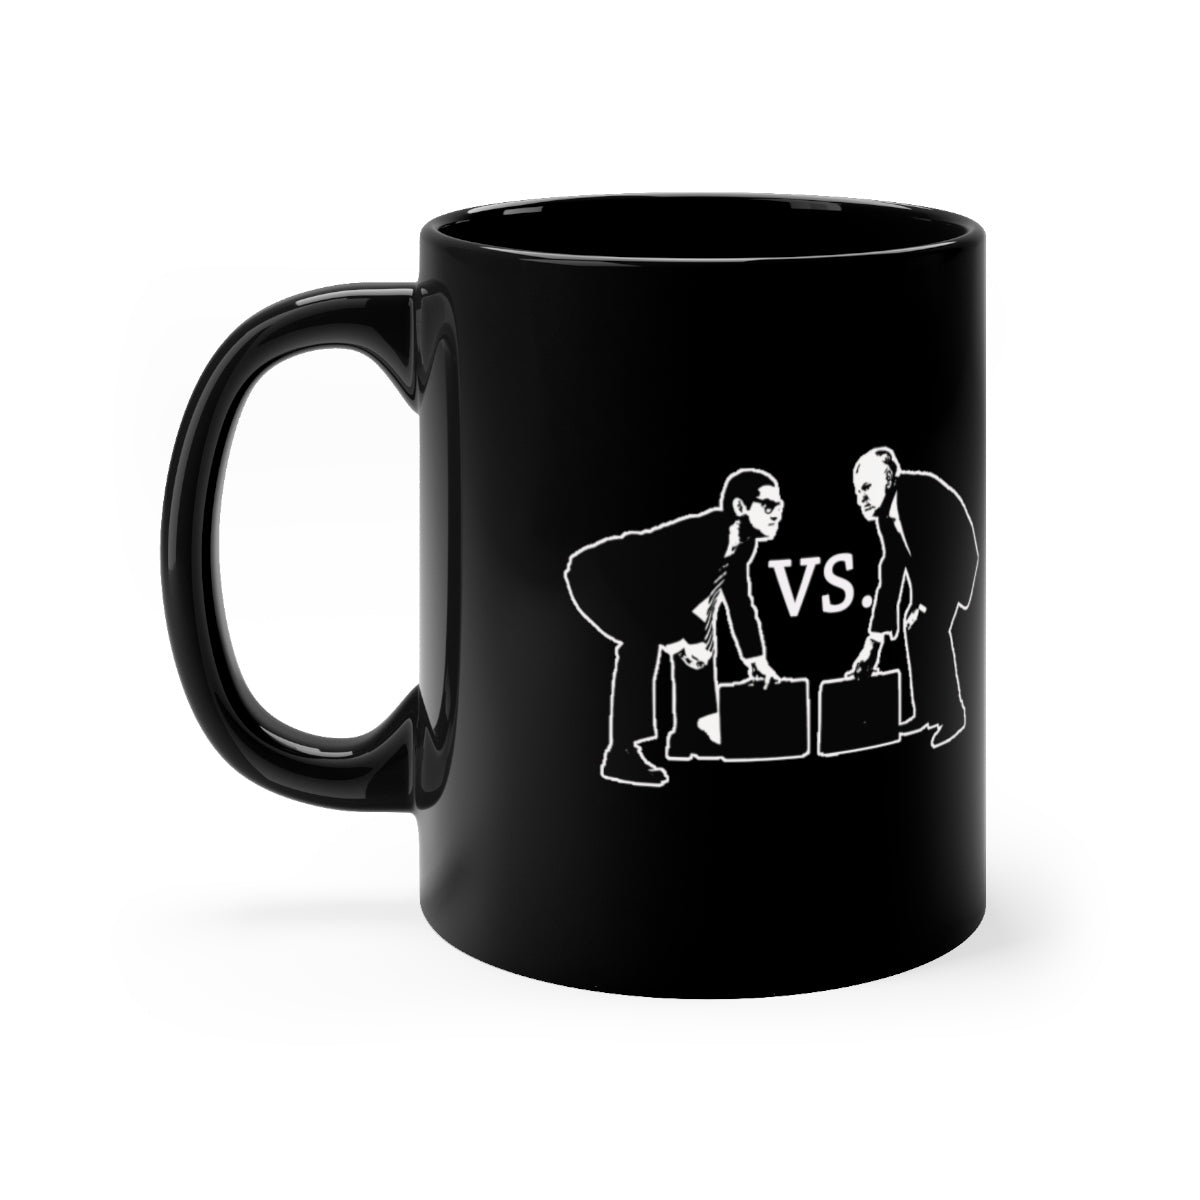 My Lawyer Can Beat Up Your Lawyer Lawyer Versus Lawyer Face Off Mug